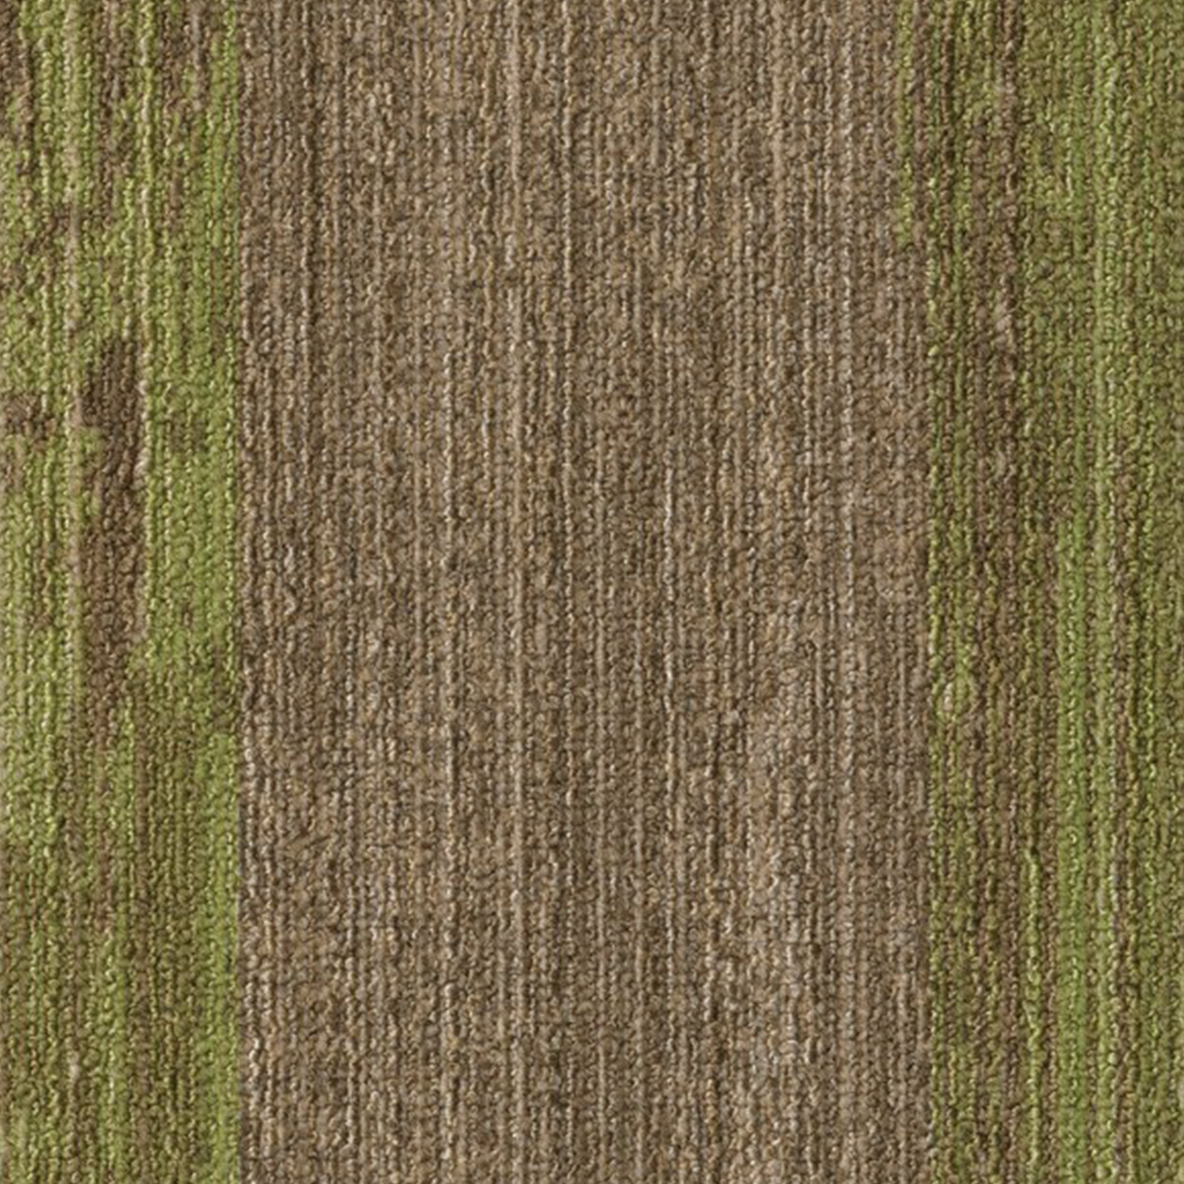 Beech Grass close up color Ingrained Commercial Carpet Plank Colors .28 Inch x 25 cm x 1 Meter Per Plank